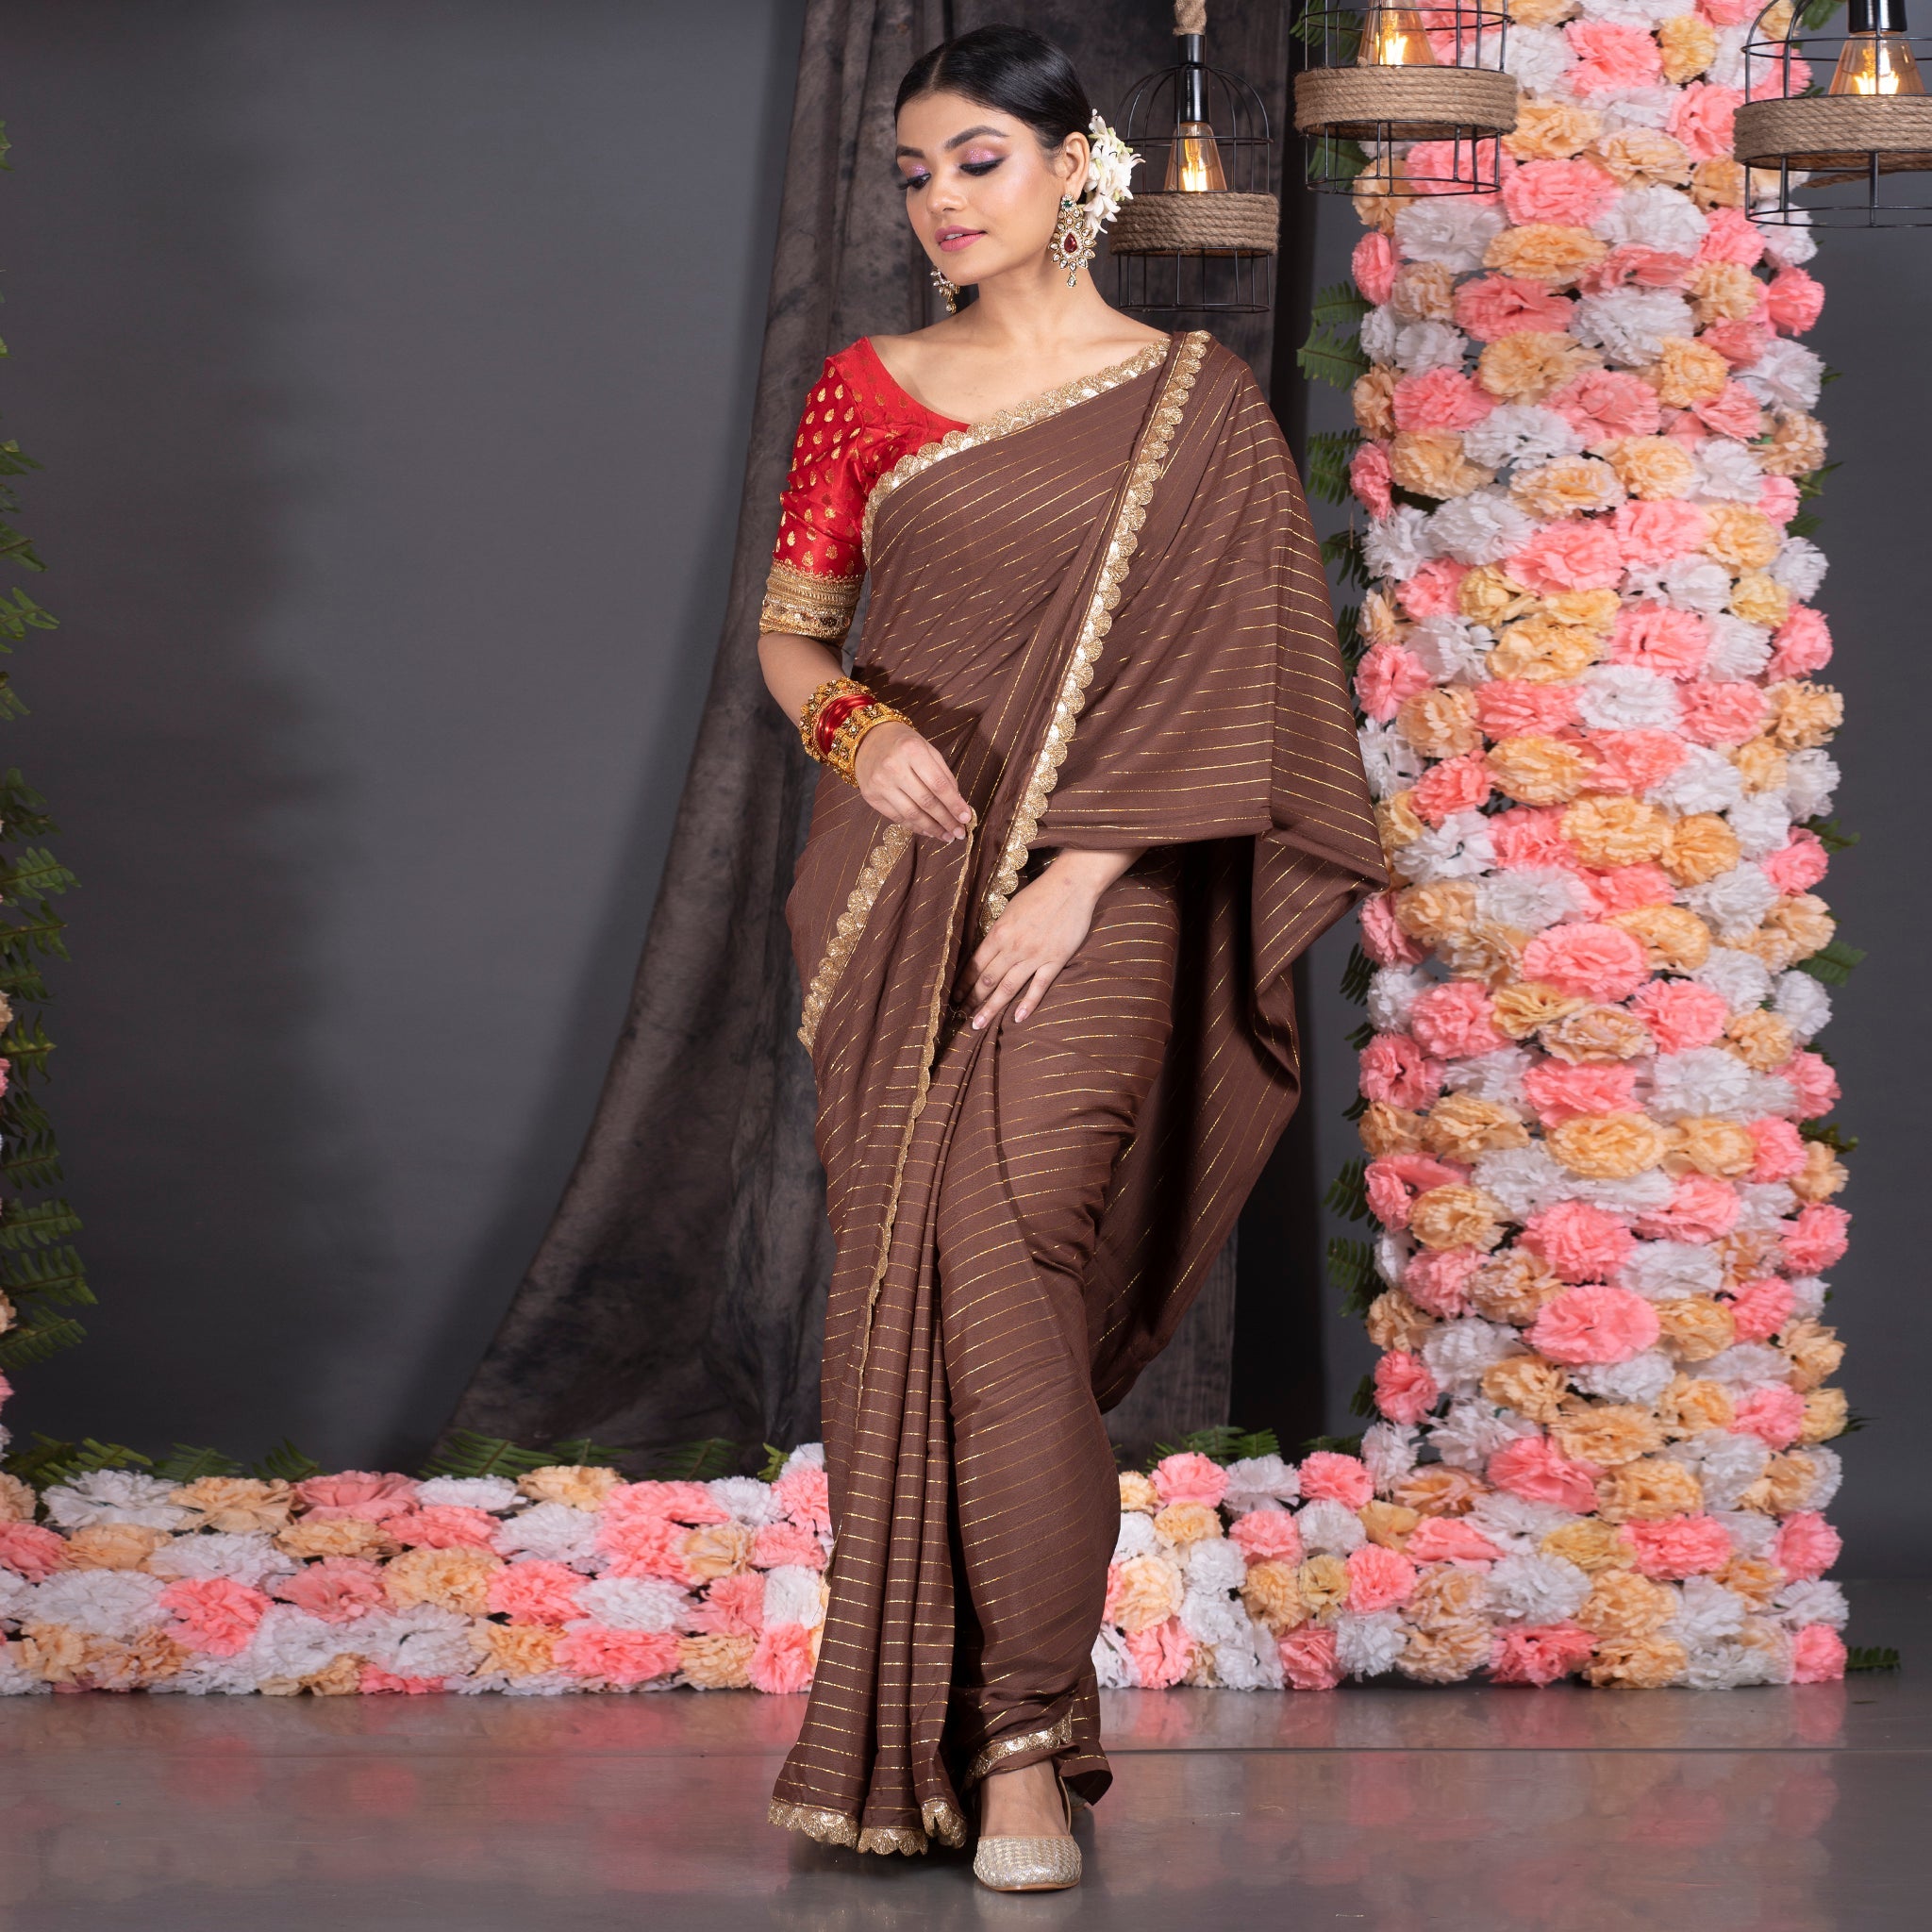 Women's Chocolate Brown Georgette Saree With Lurex Gold Stripes And Scallop Embroidered Border - Boveee